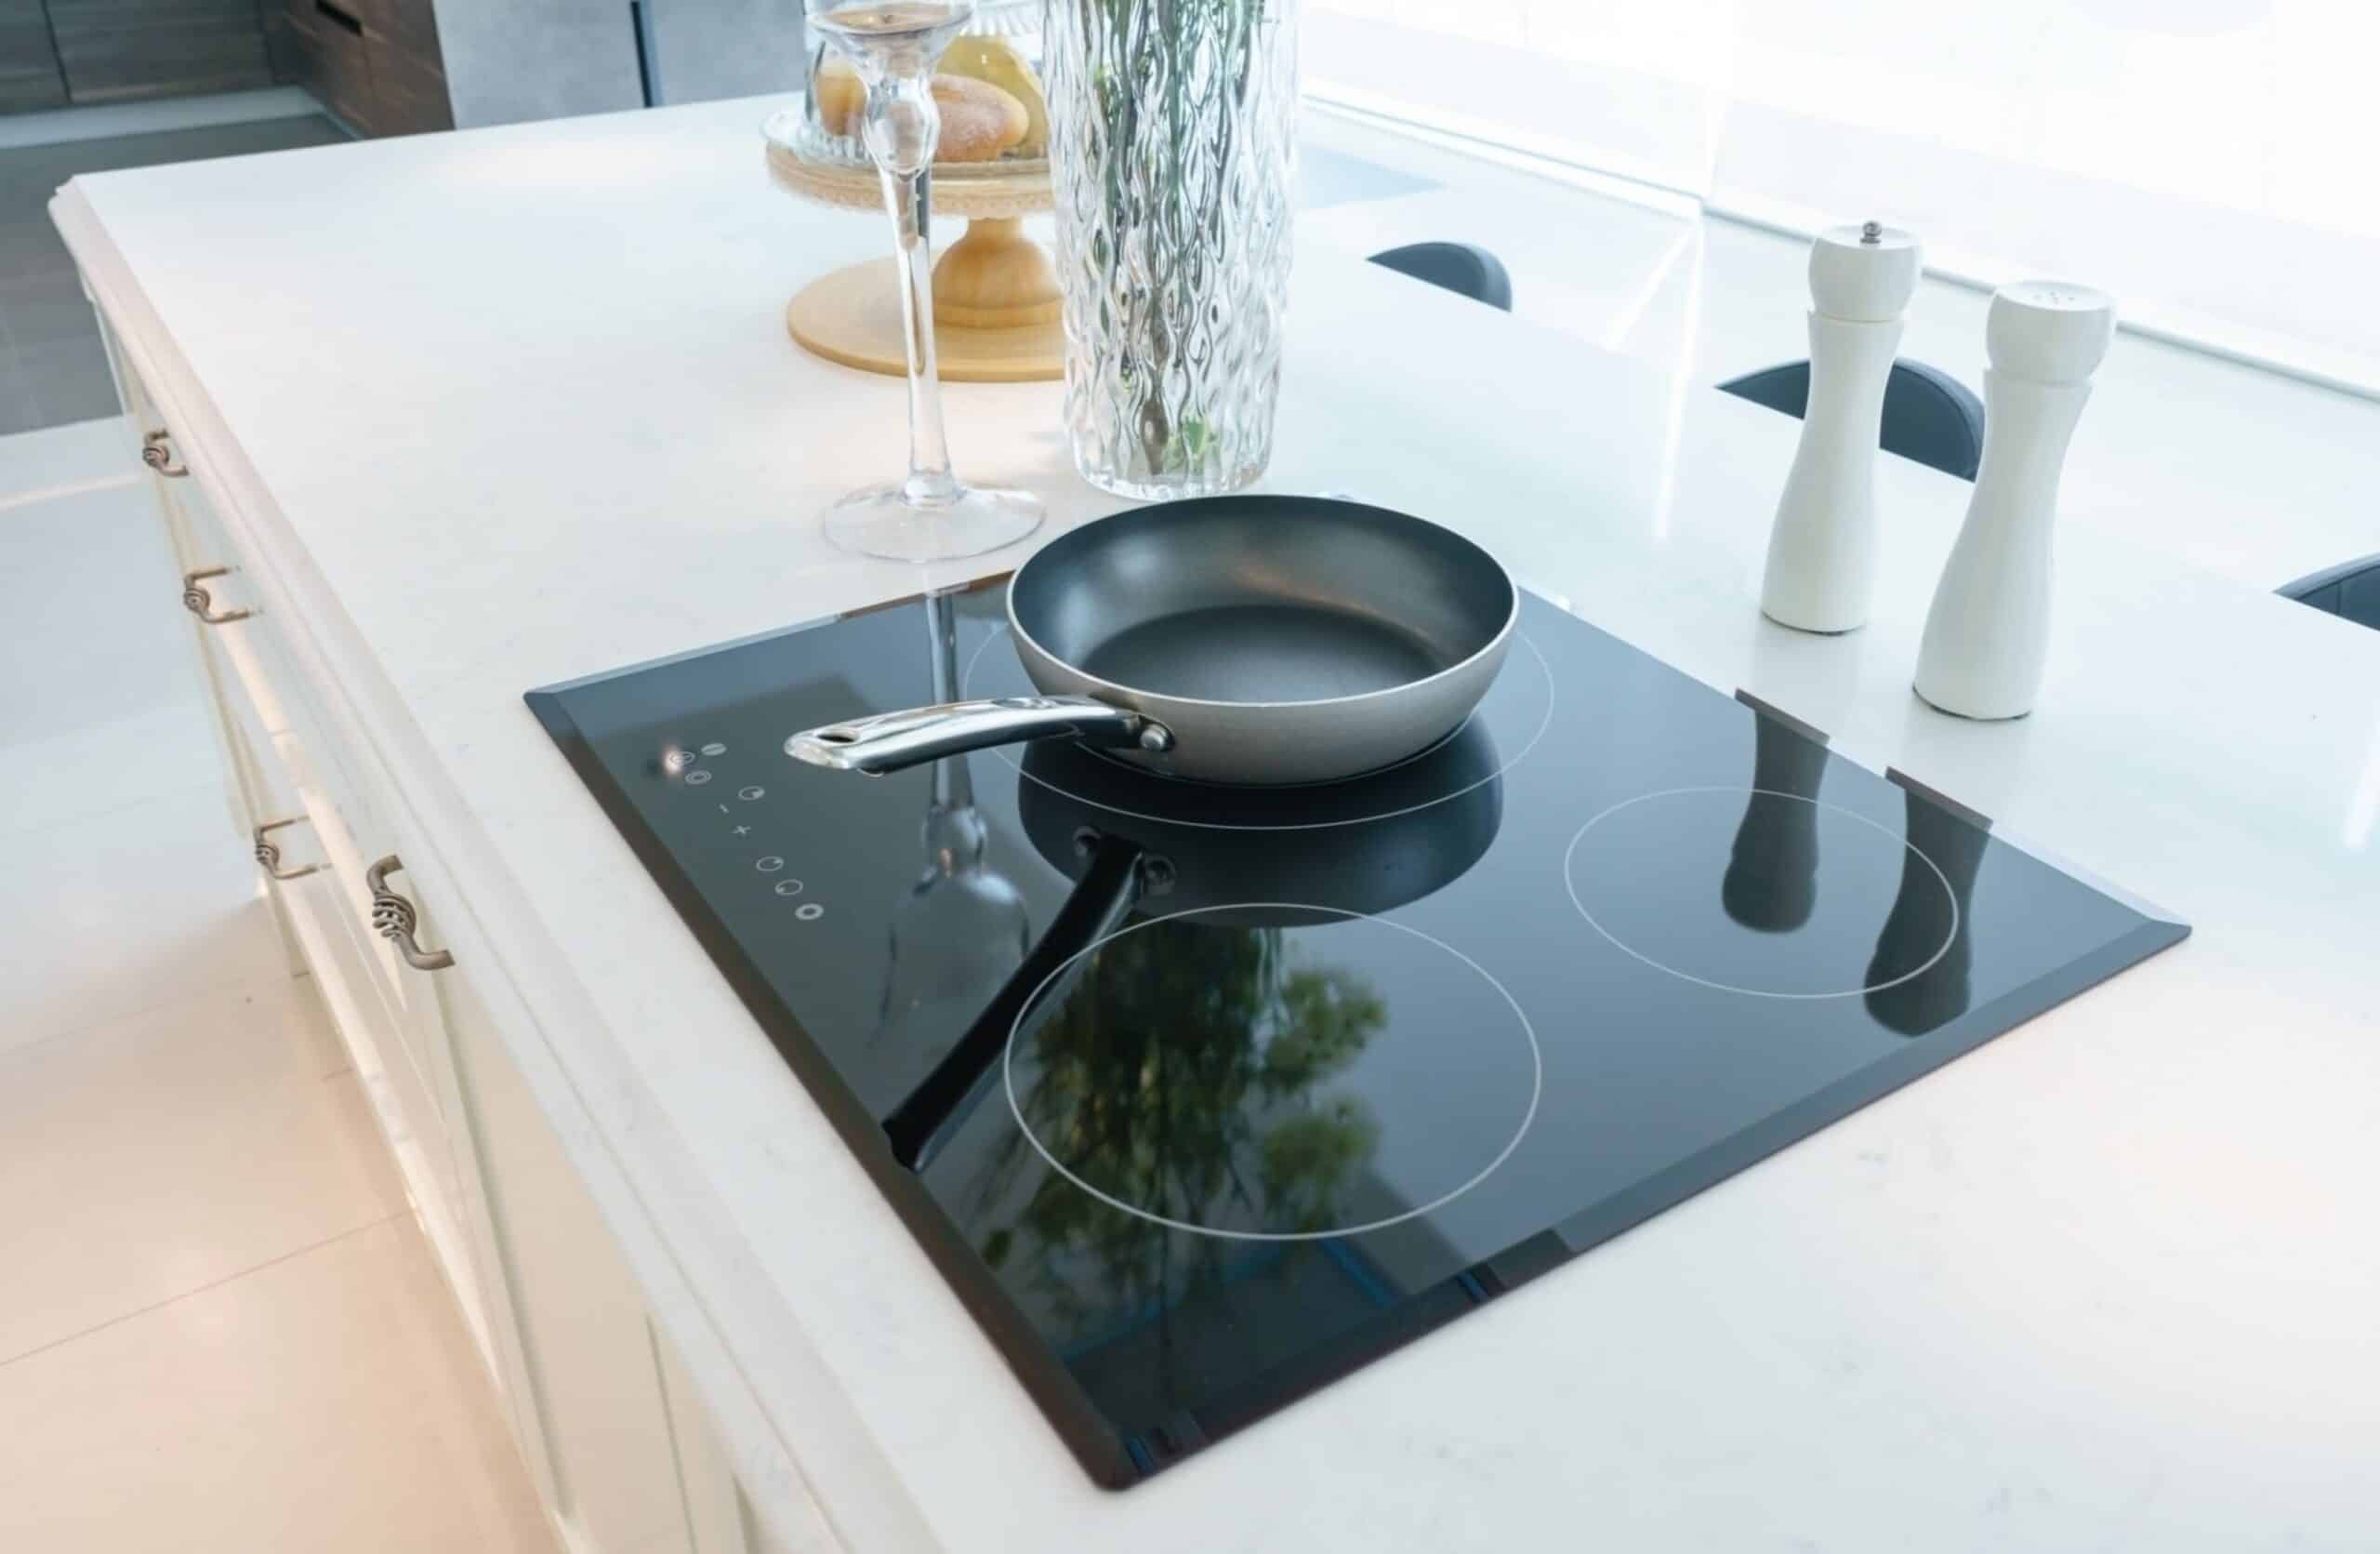 Frying pan on modern black induction stove cooker